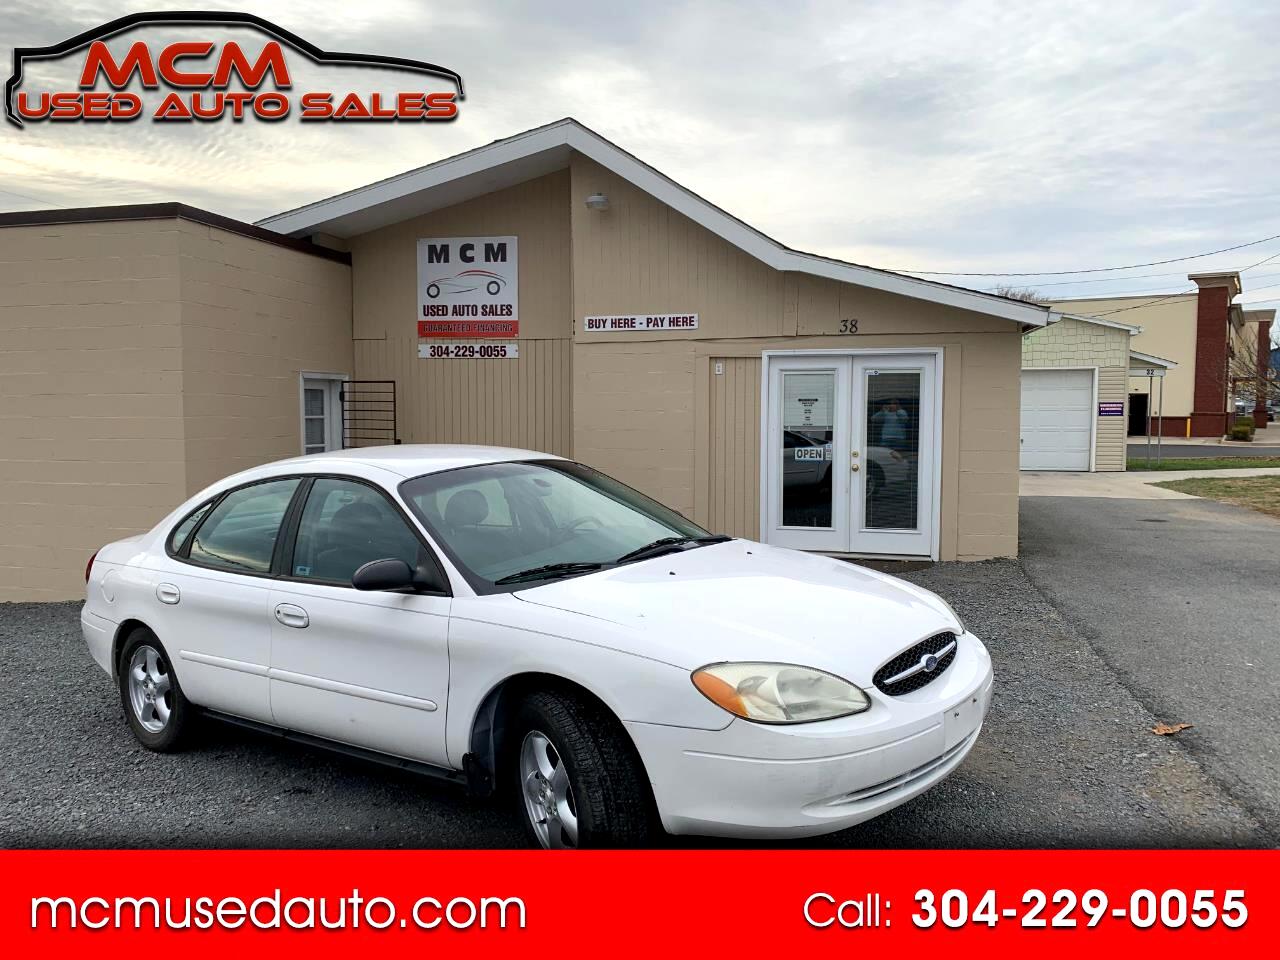 Used 2003 Ford Taurus Ses Ffv For Sale In Inwood Wv 25428